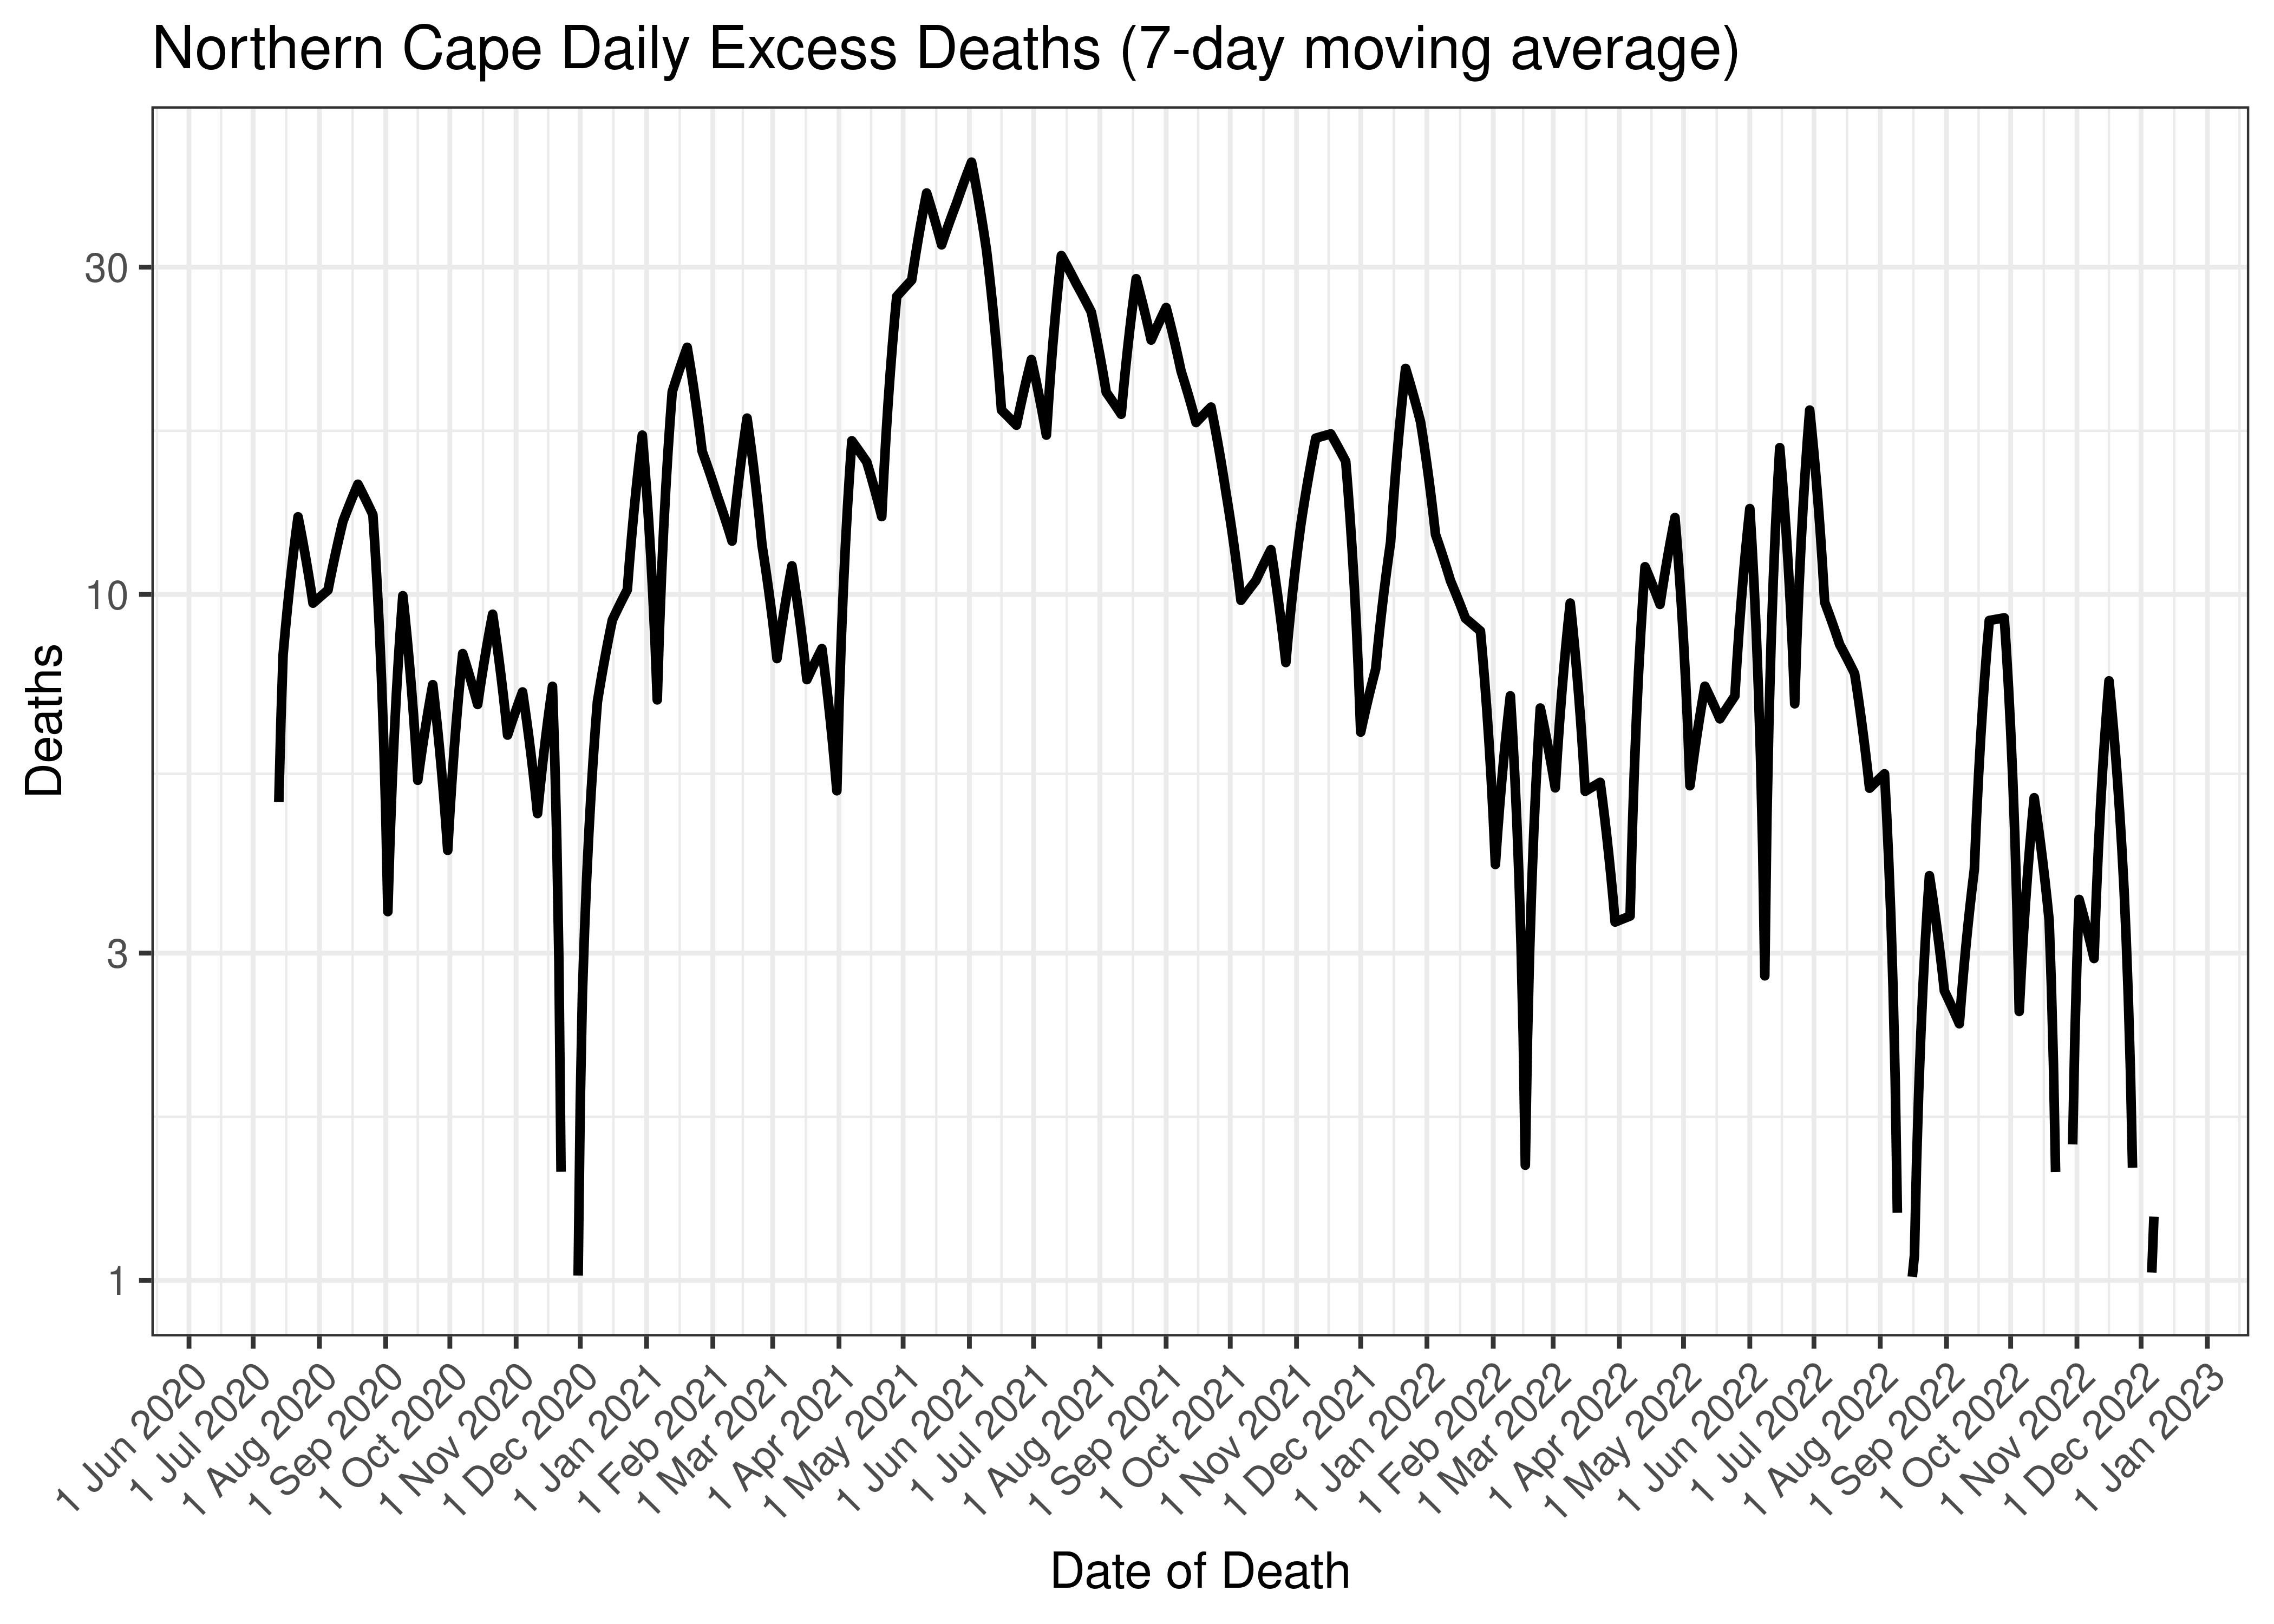 Northern Cape Daily Excess Deaths (7-day moving average)